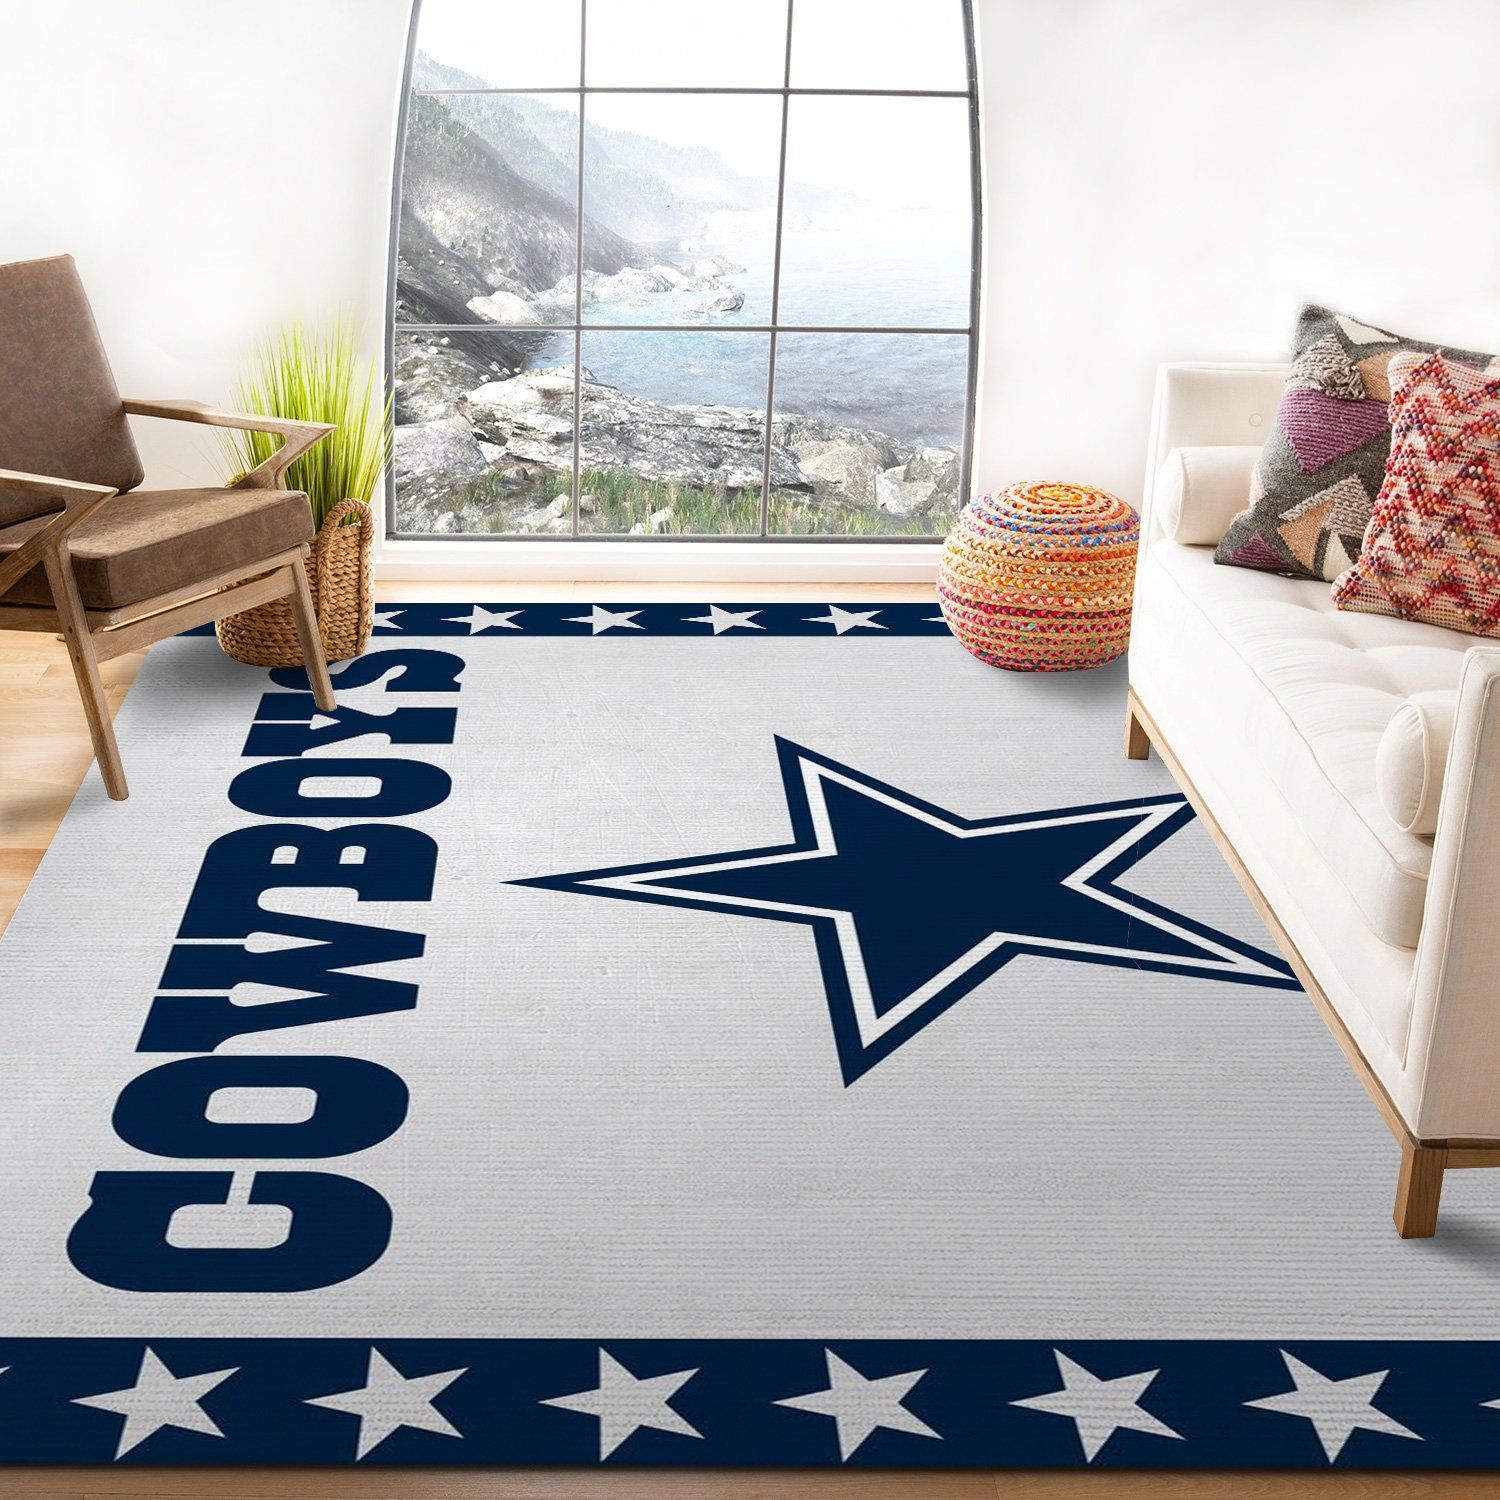 Dallas Cowboys Banner Nfl Logo Area Rug For Gift Living Room Rug Home Decor Floor Decor - Indoor Outdoor Rugs